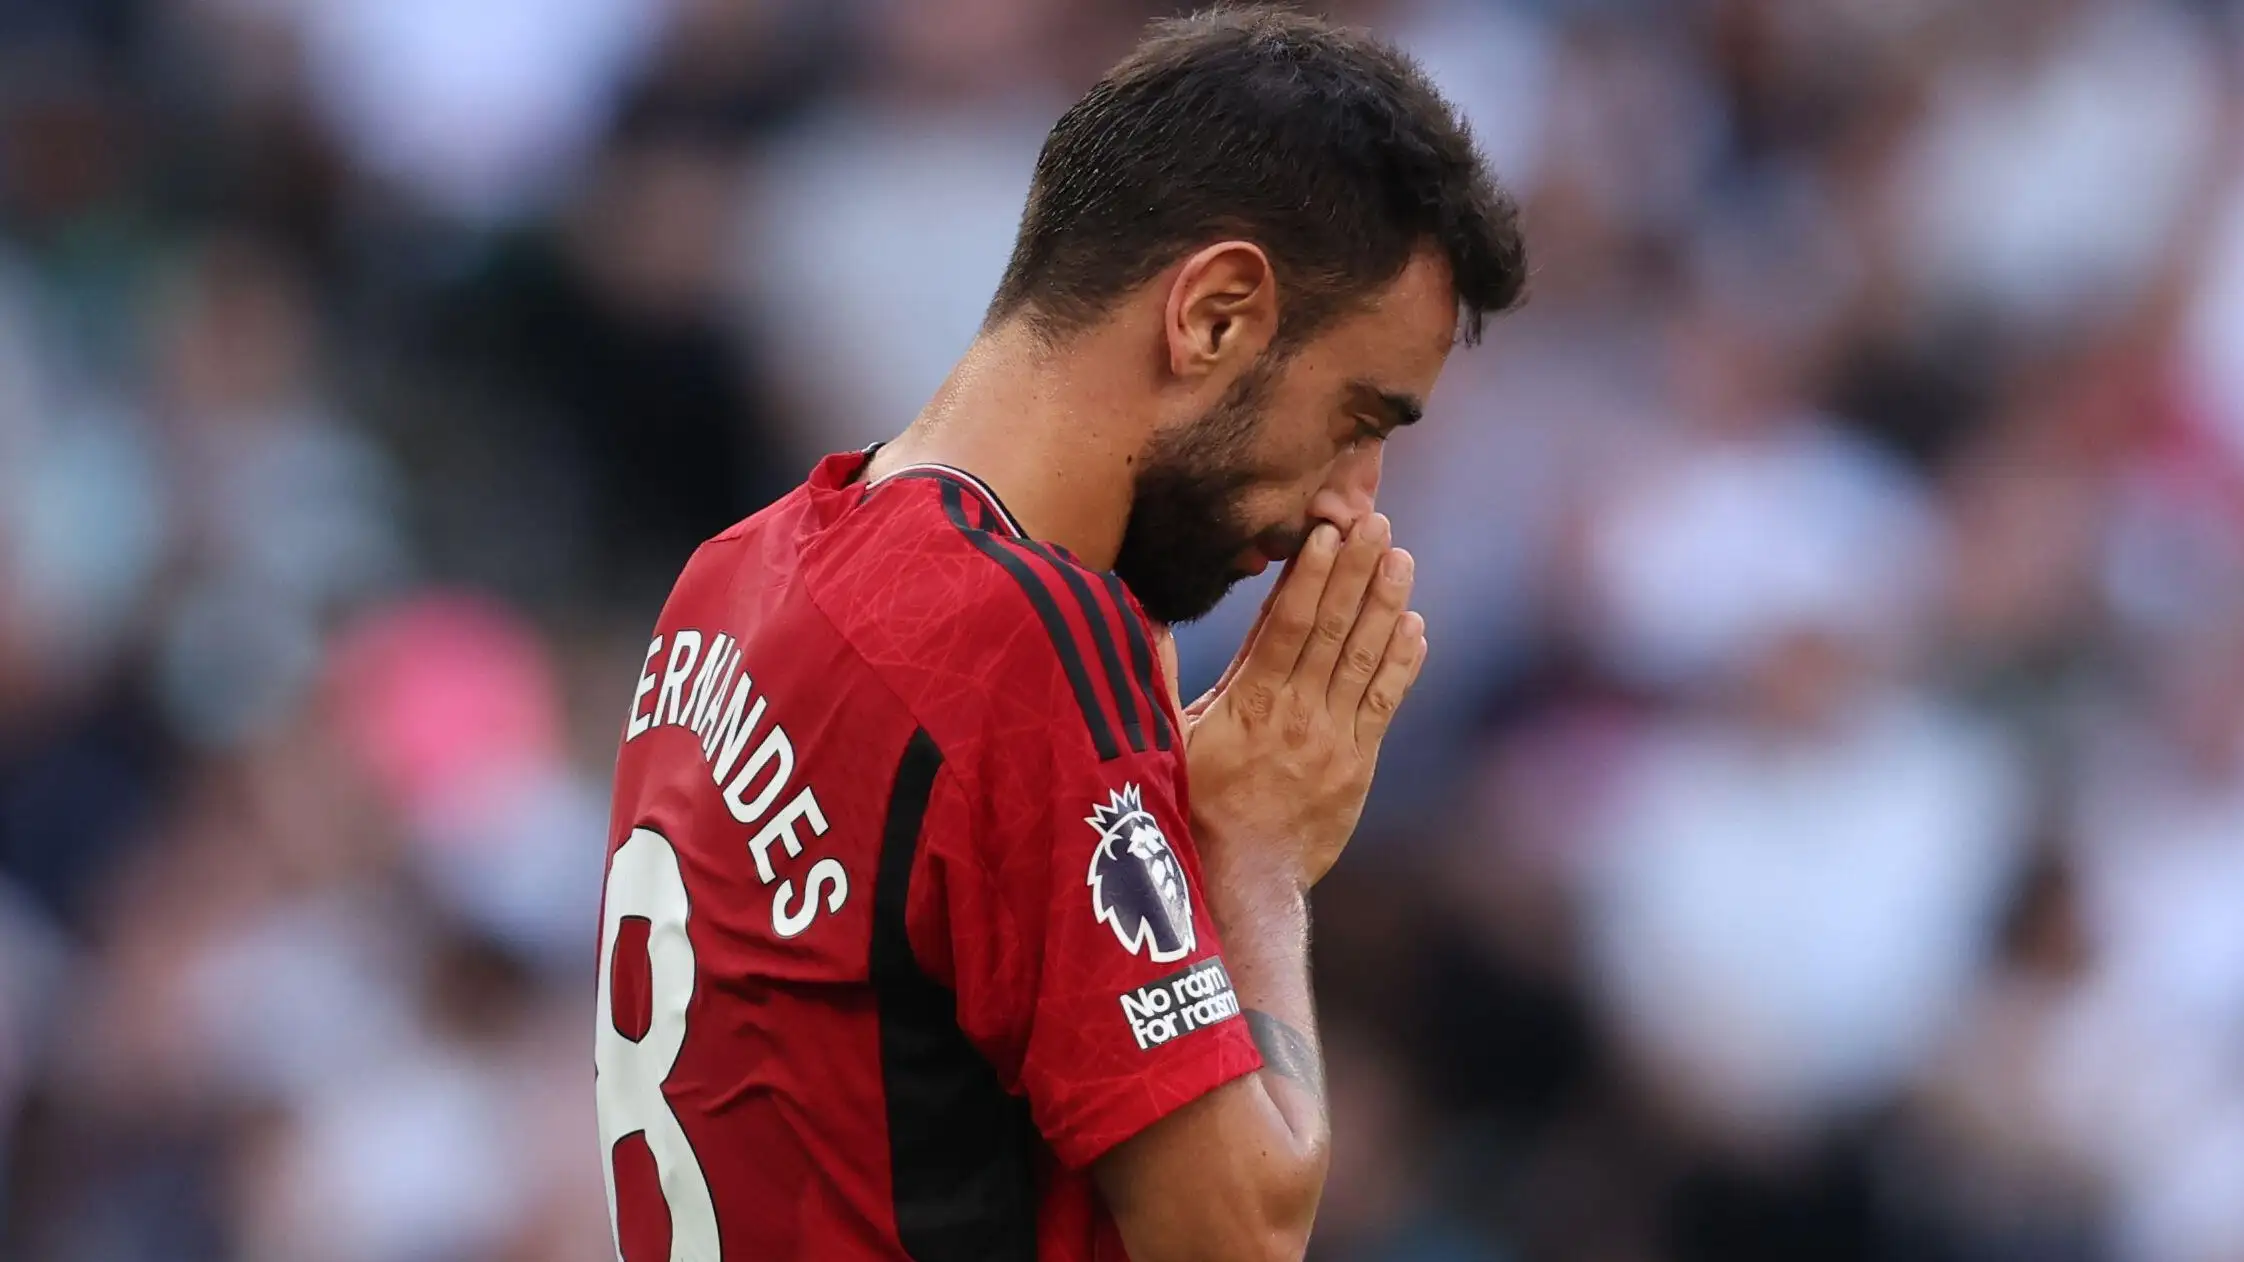 Bruno Fernandes reacts after missing a chance for Manchester United against Totternham.